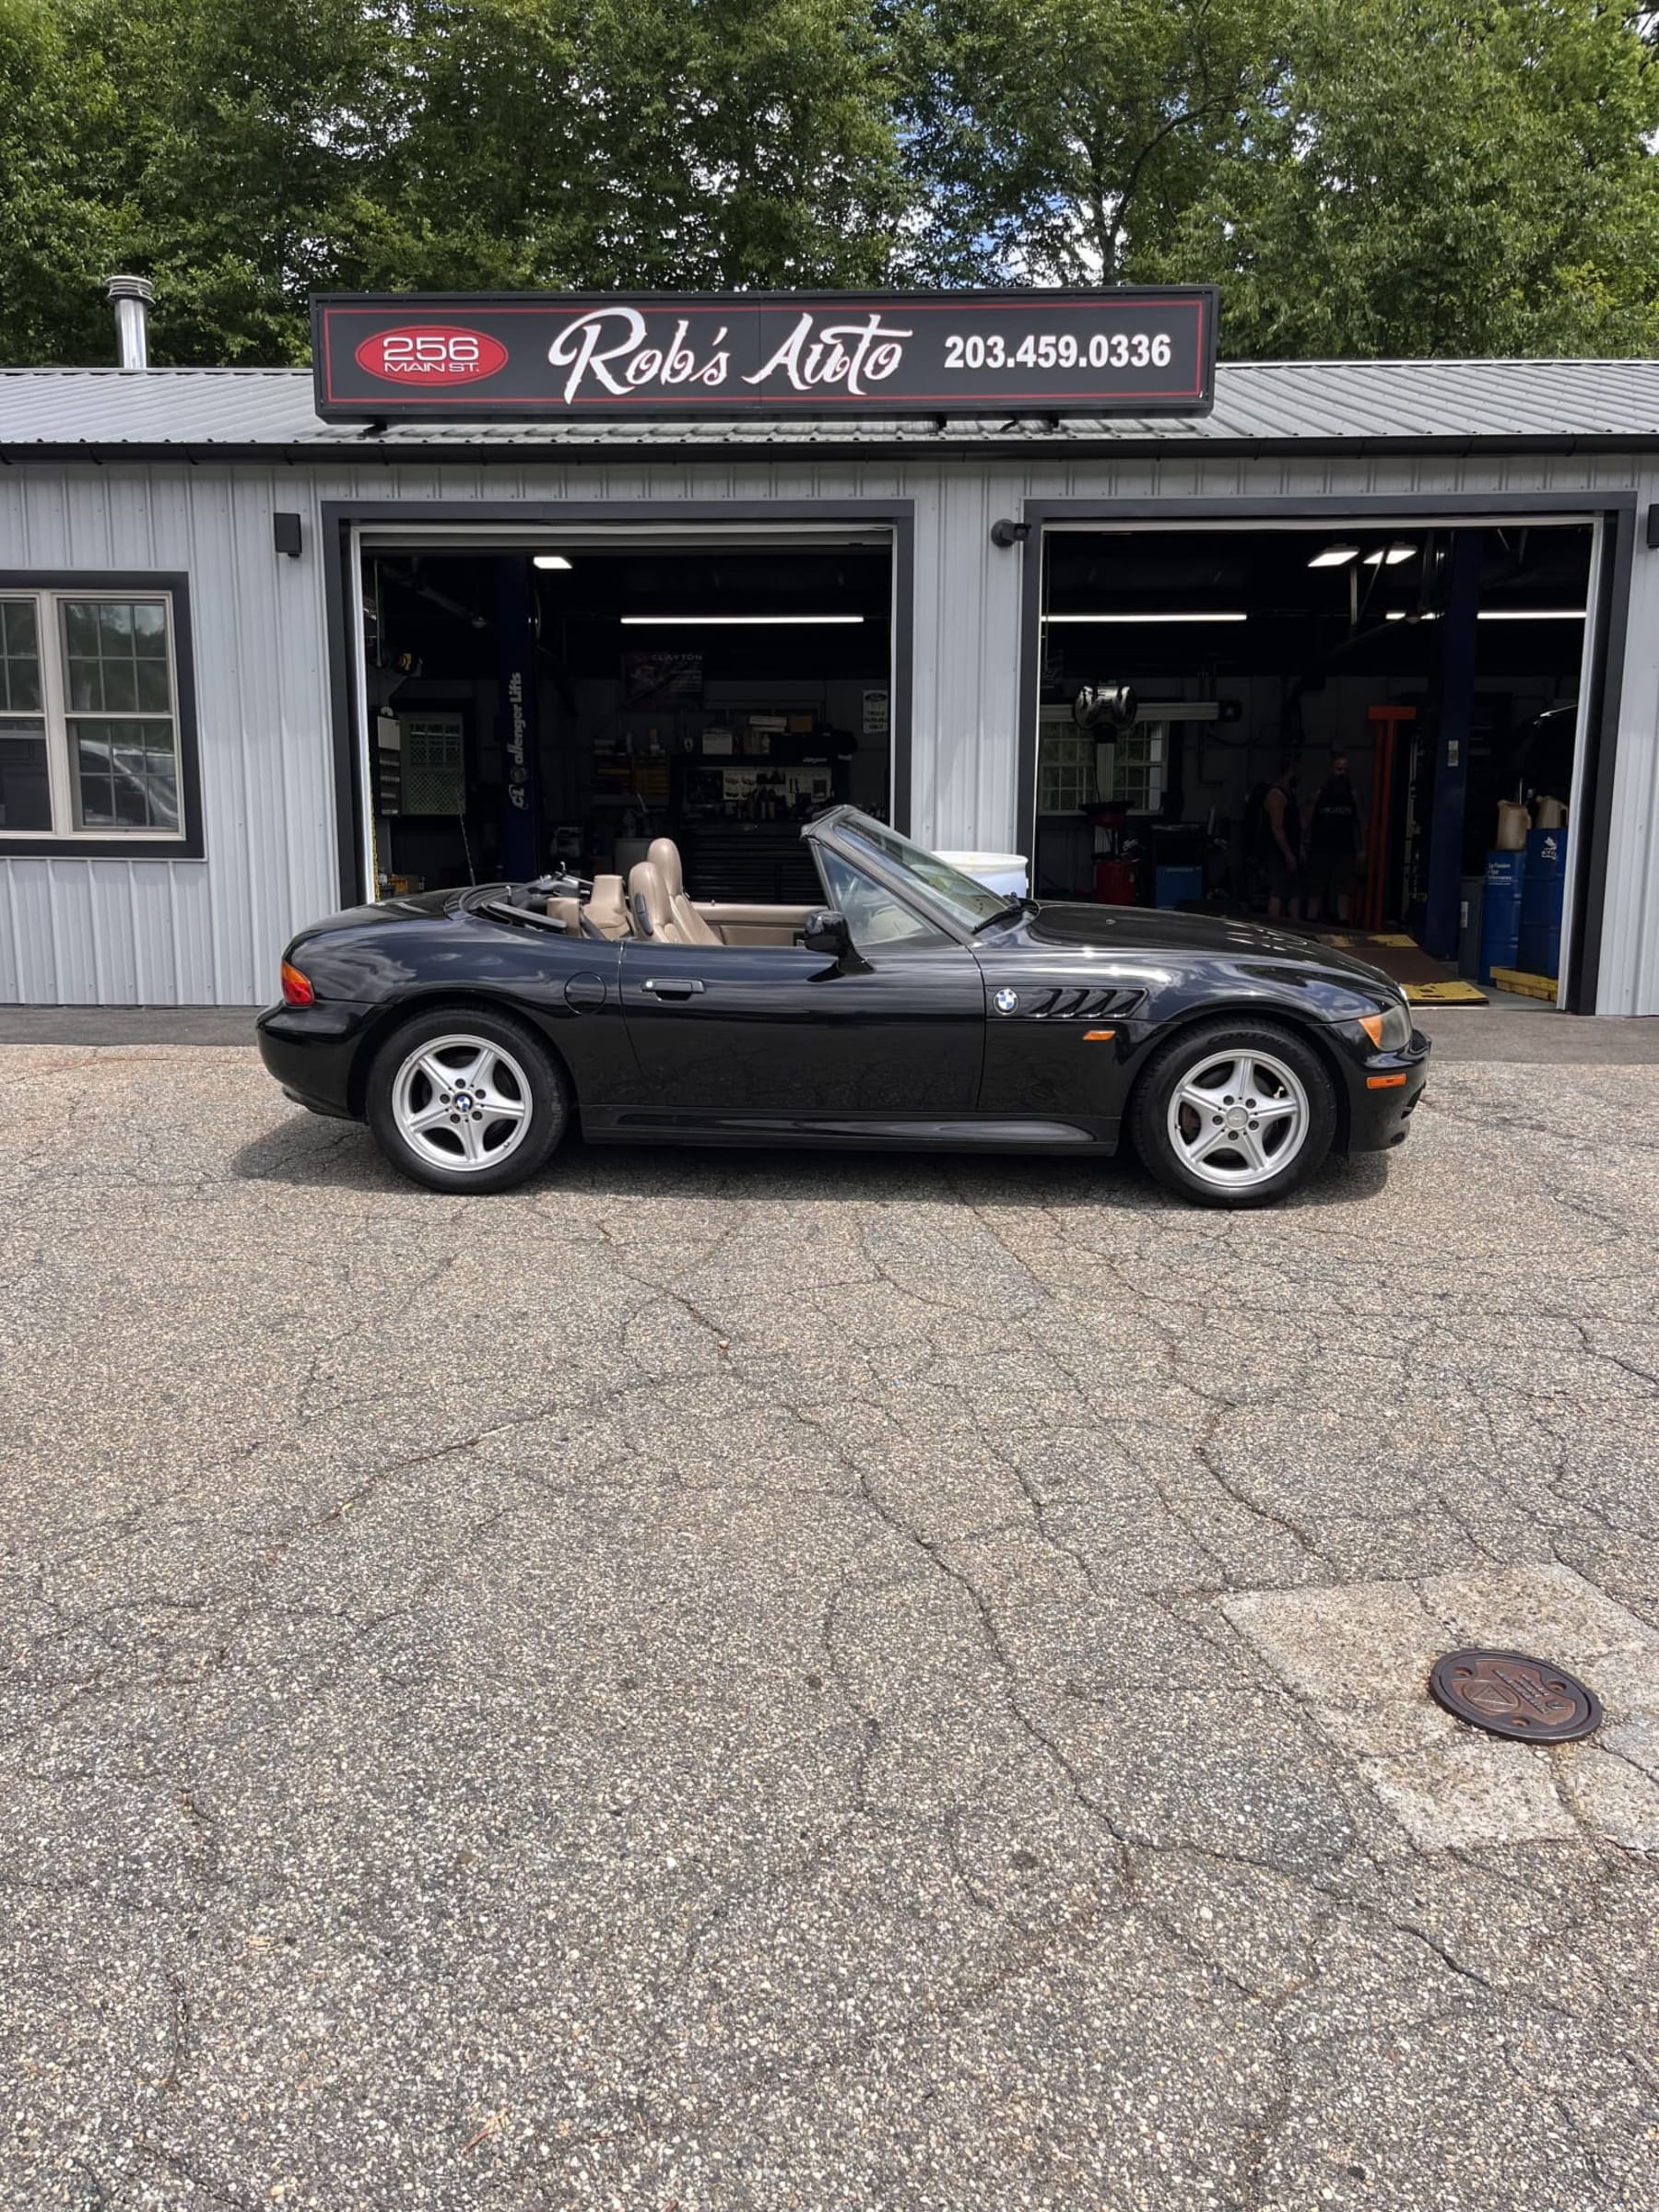 NEW ARRIVAL!! 1997 BMW Z3 1.9!! Runs and drives great. ONLY 117k miles!! 5 speed manual transmission!! Top in great shape!! Just in time for summer!! Won’t last at Only $6,900!!